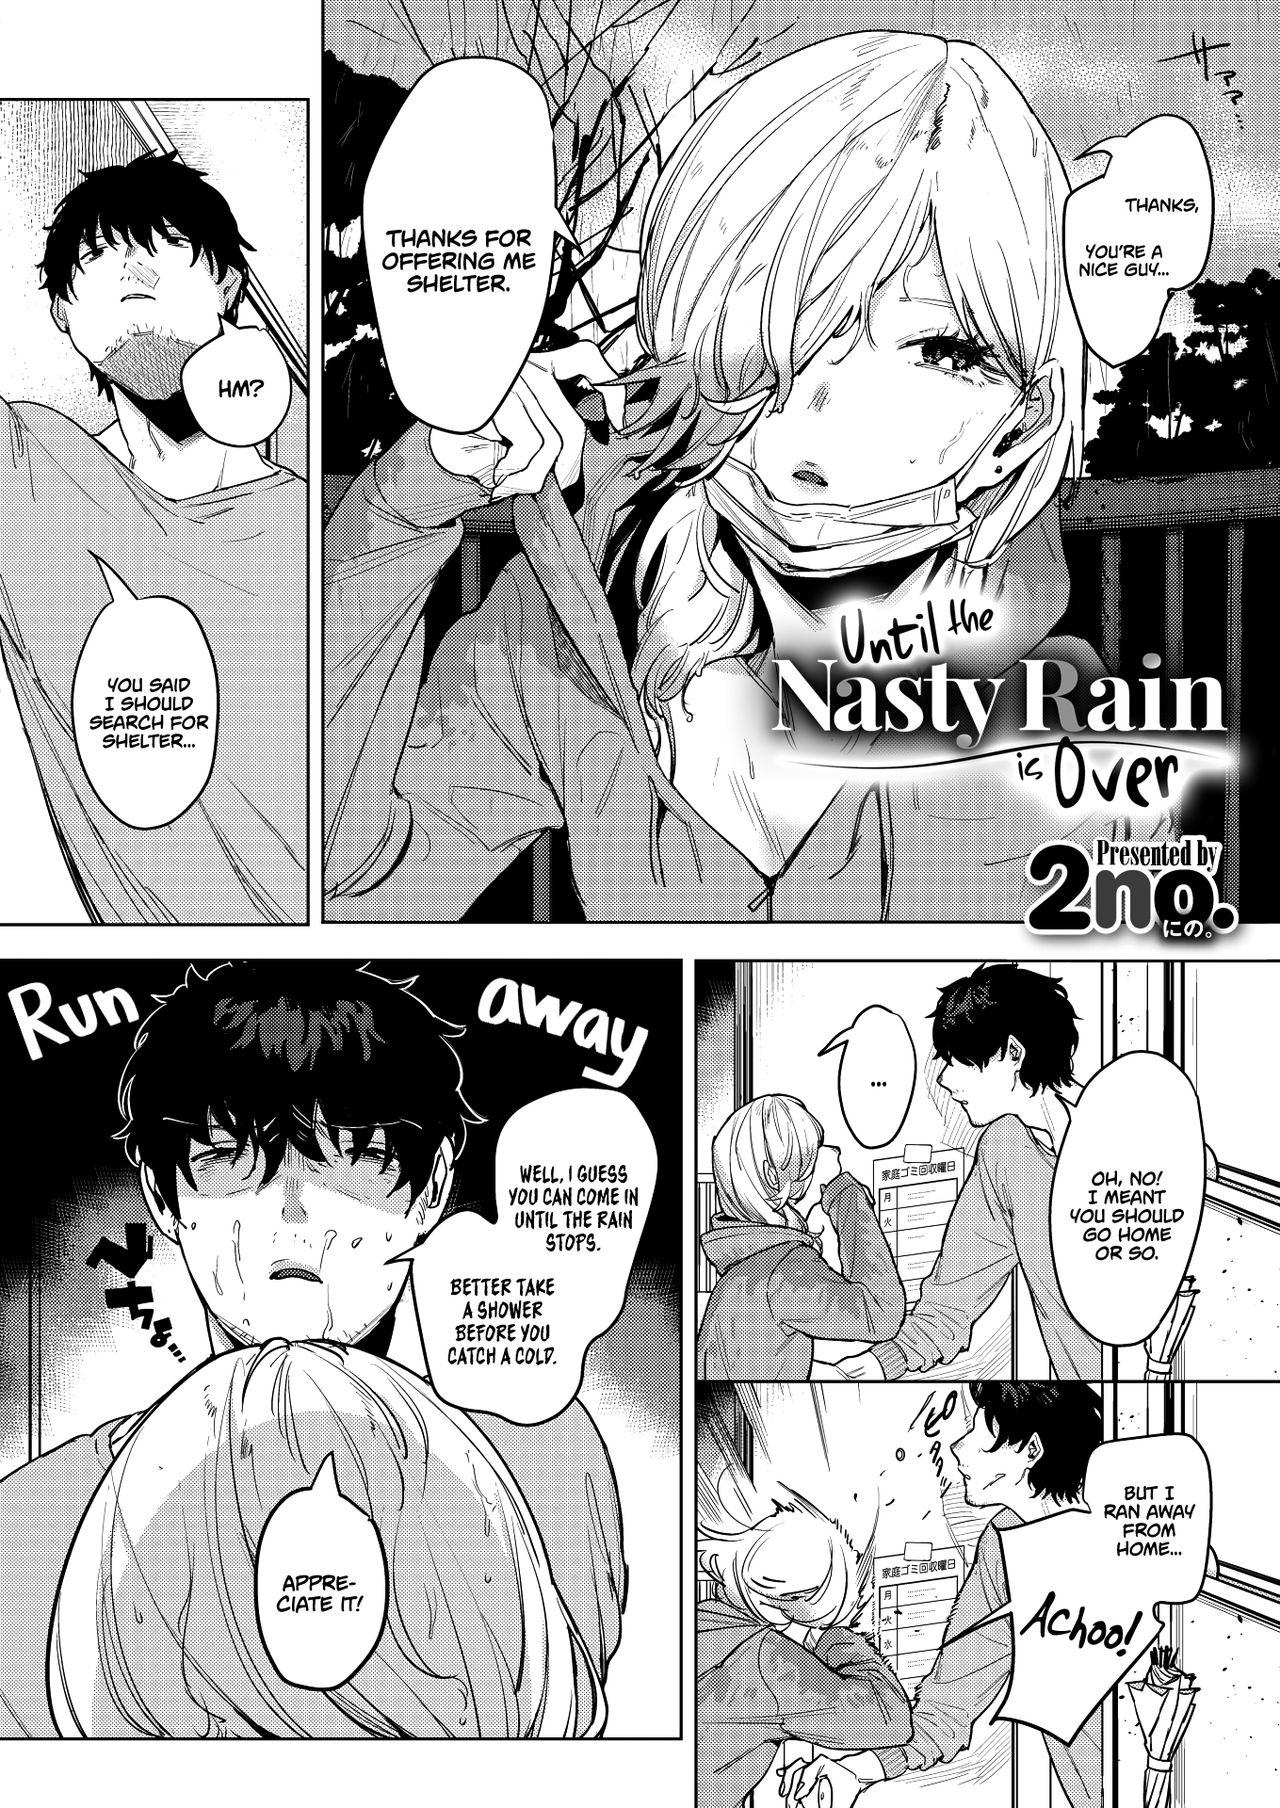 8teen Until the Nasty Rain is Over Orgasms - Page 2